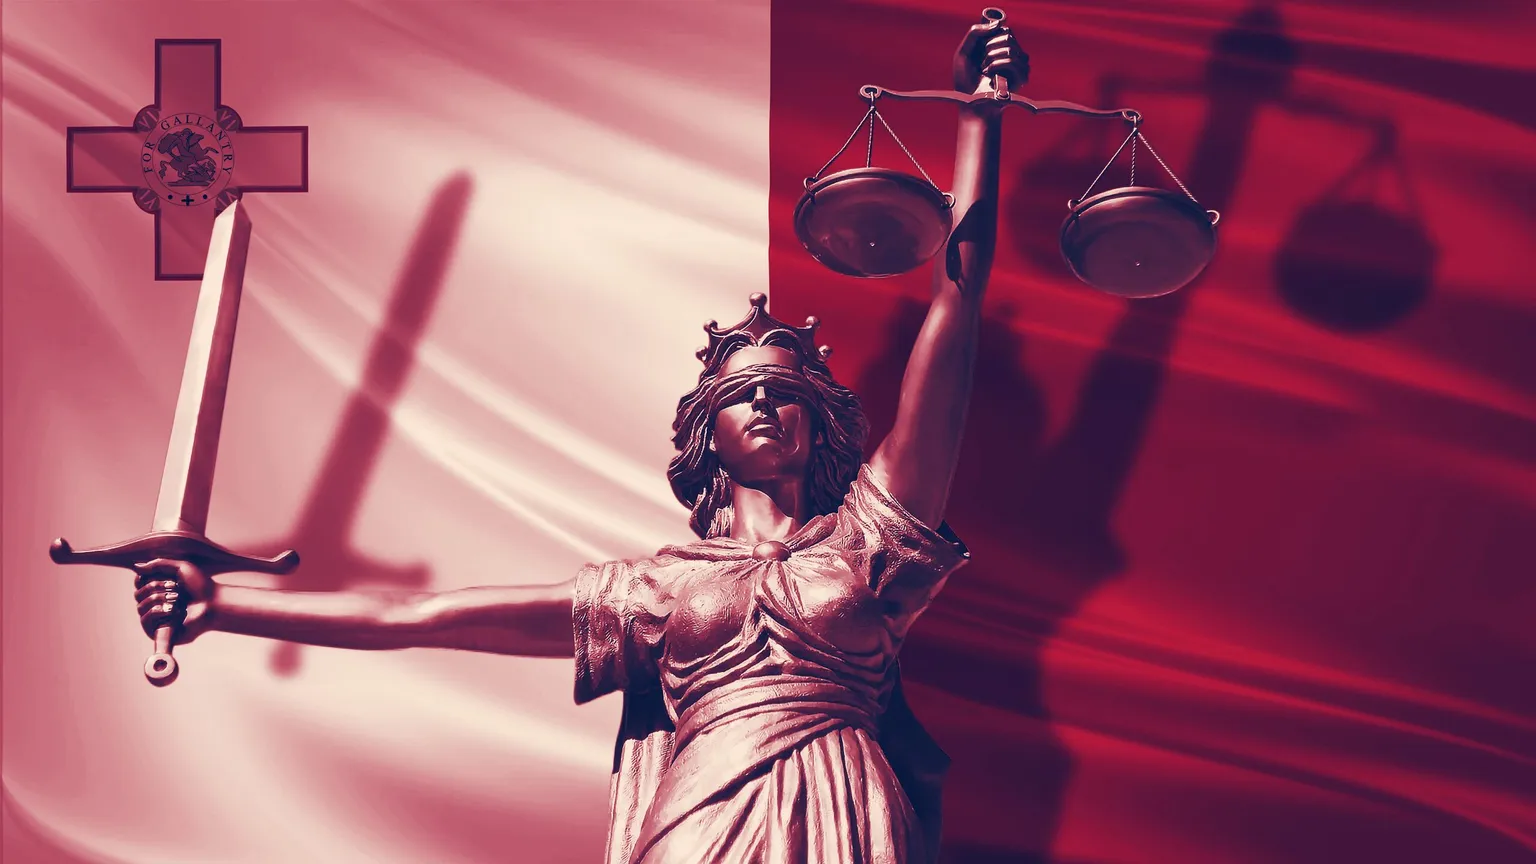 Justice has not been served on government officials involved in large-scale corruption says whistleblower Mark Camilleri. Image: Shutterstock.